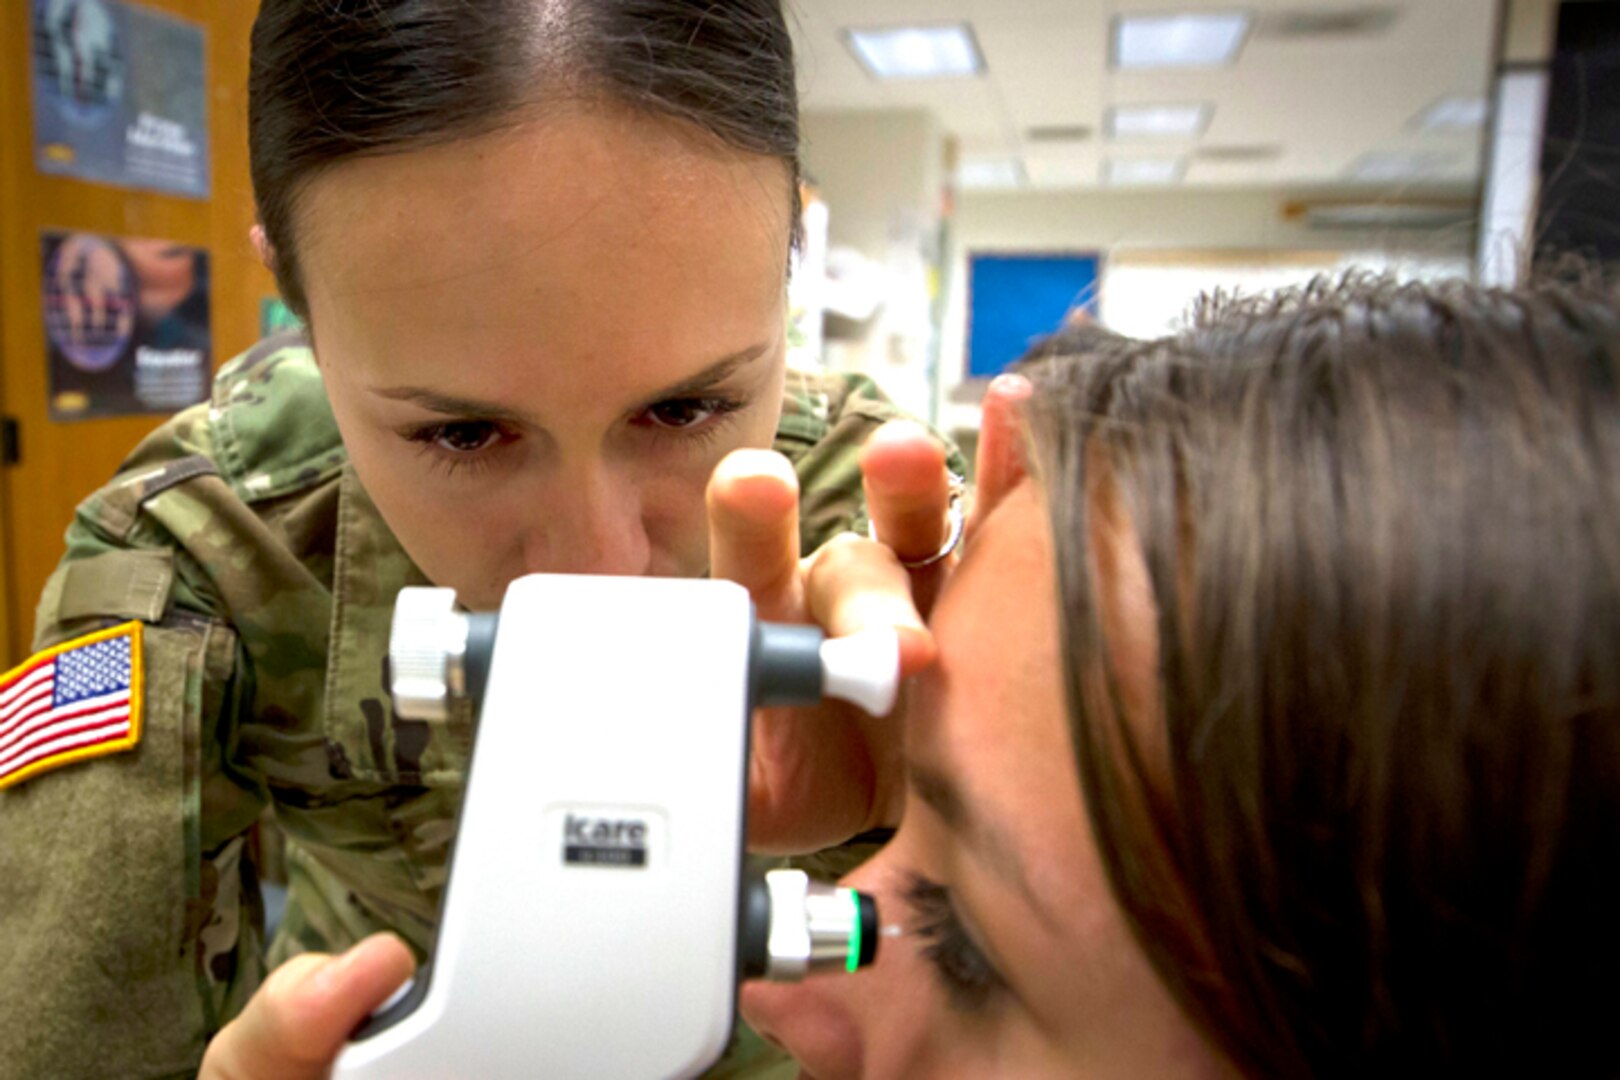 Spc. Brianne Coots, an eye specialist in the U.S. Army Reserve assigned to the 1984th U.S. Army Hospital, 9th Mission Support Command out of Honolulu, Hawaii, performs an eye exam during Tropic Care 2018 in Kea’au, Hawaii, June 24, 2018.